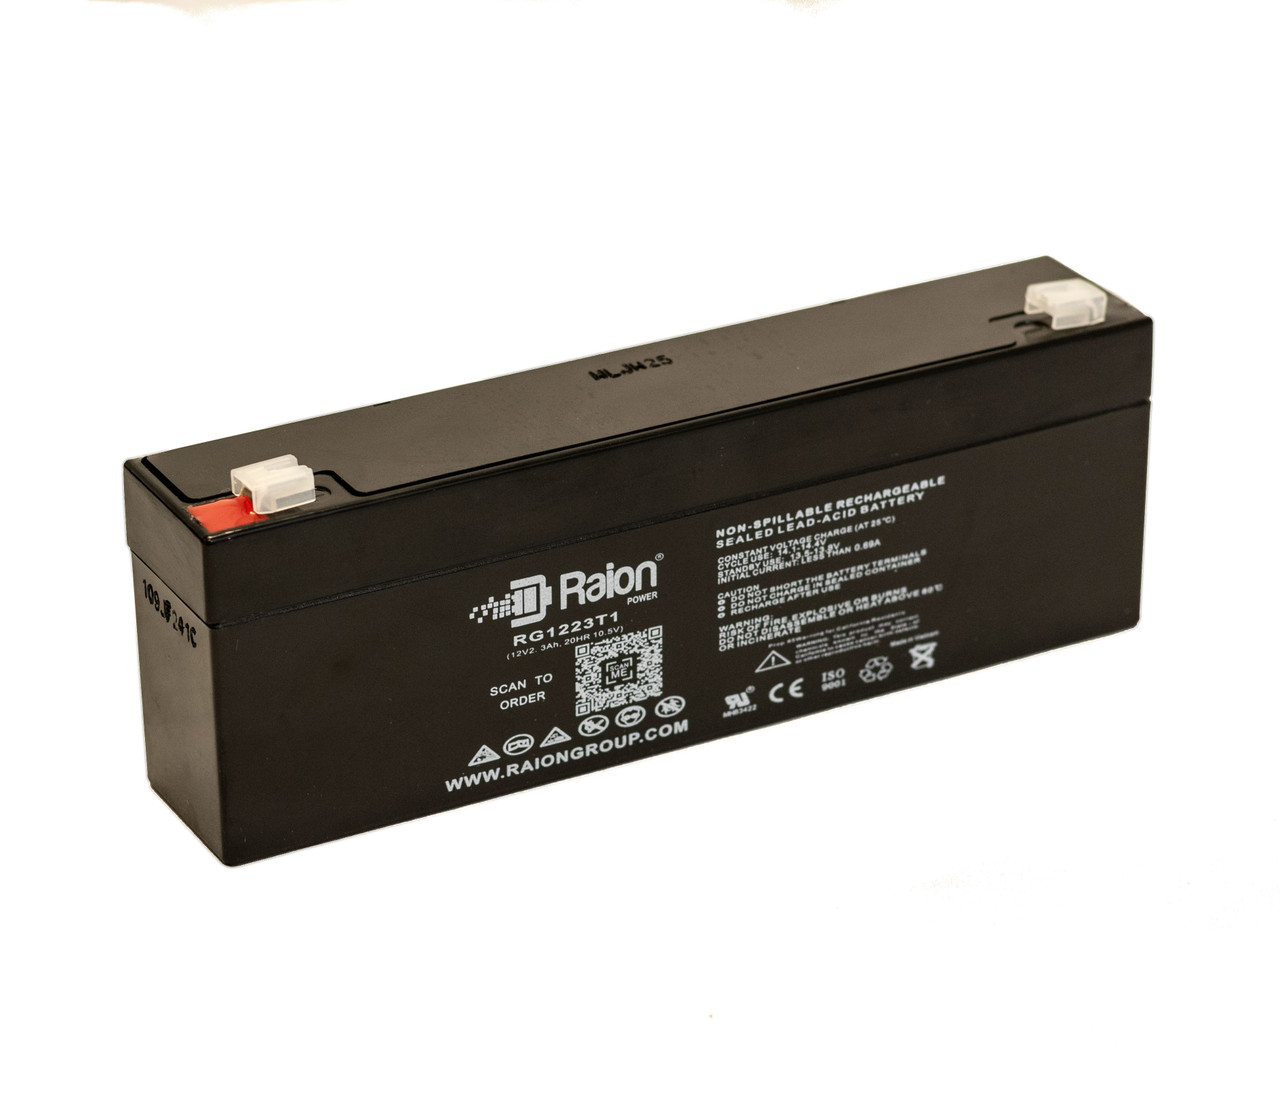 Raion Power RG1223T1 Replacement Battery for Gs Portalac PXL12023